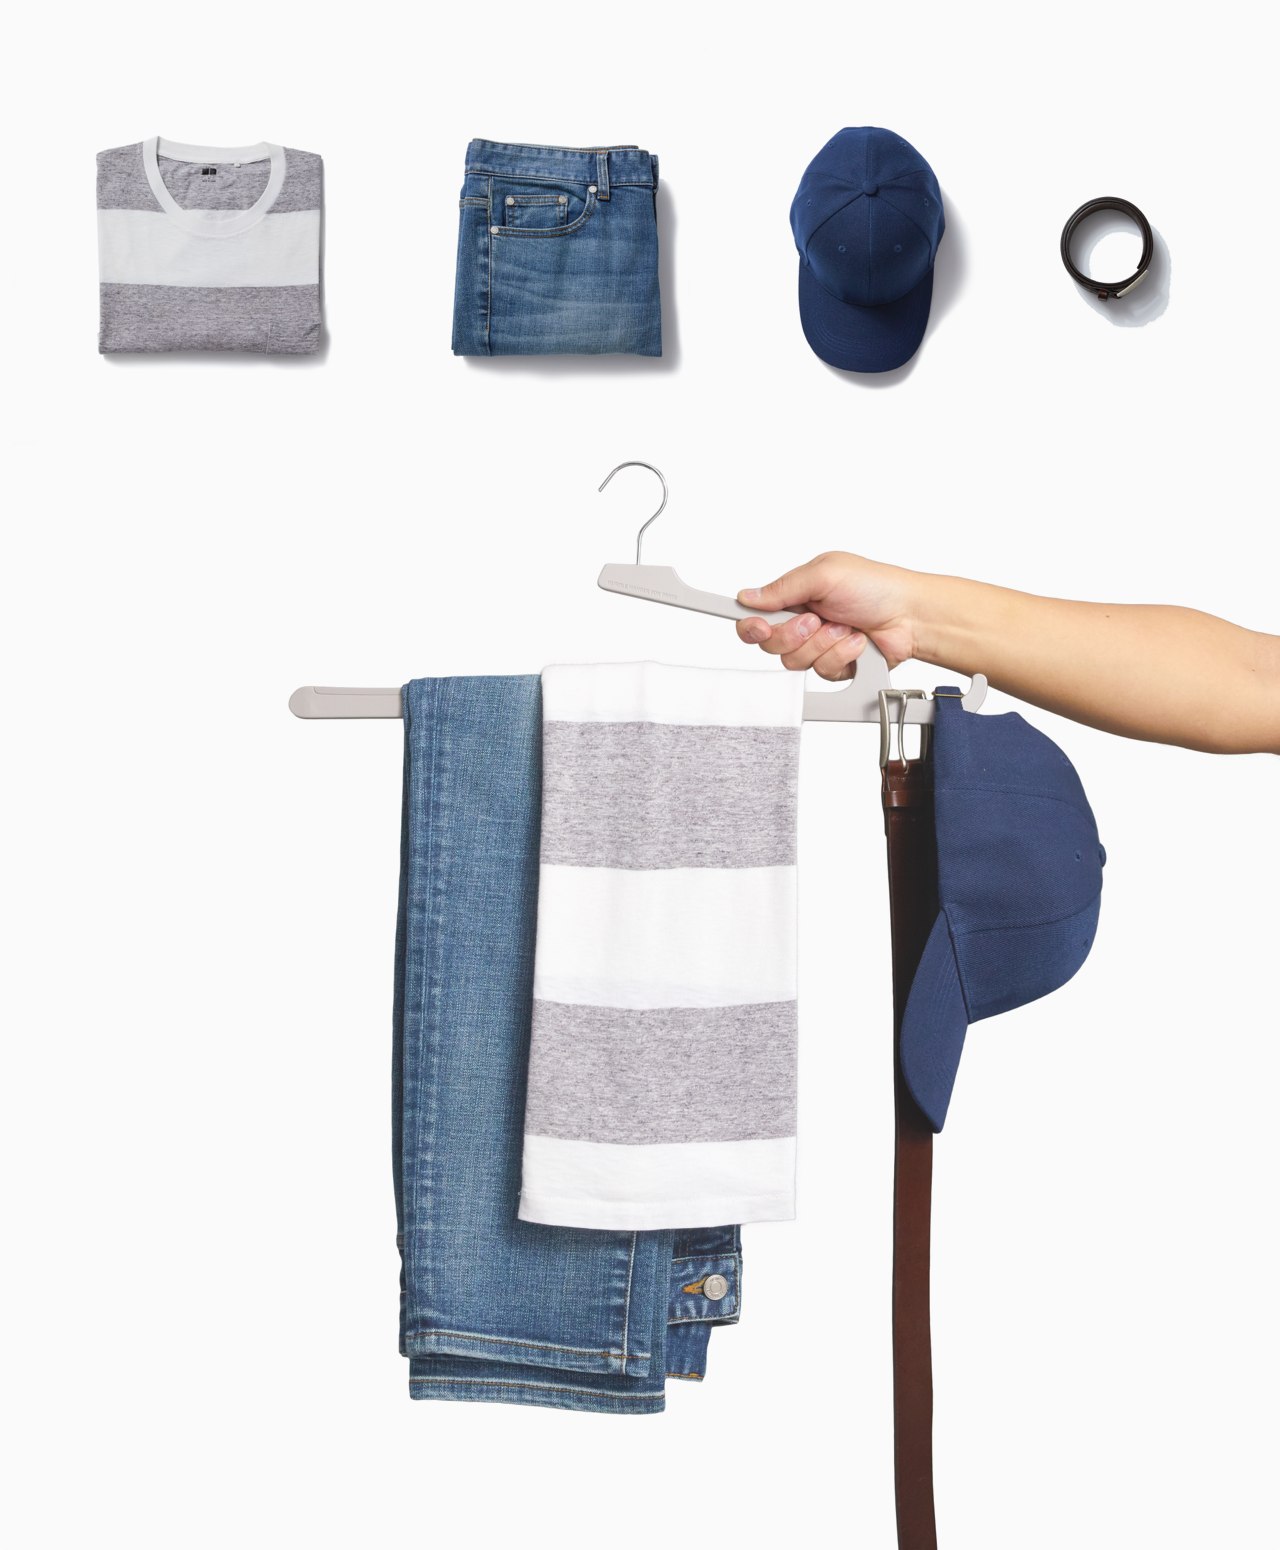 Hurdle Hanger for Pants Innovative Pants Hanger Designed to Organize Your Clothes in a Snap 10-Pack